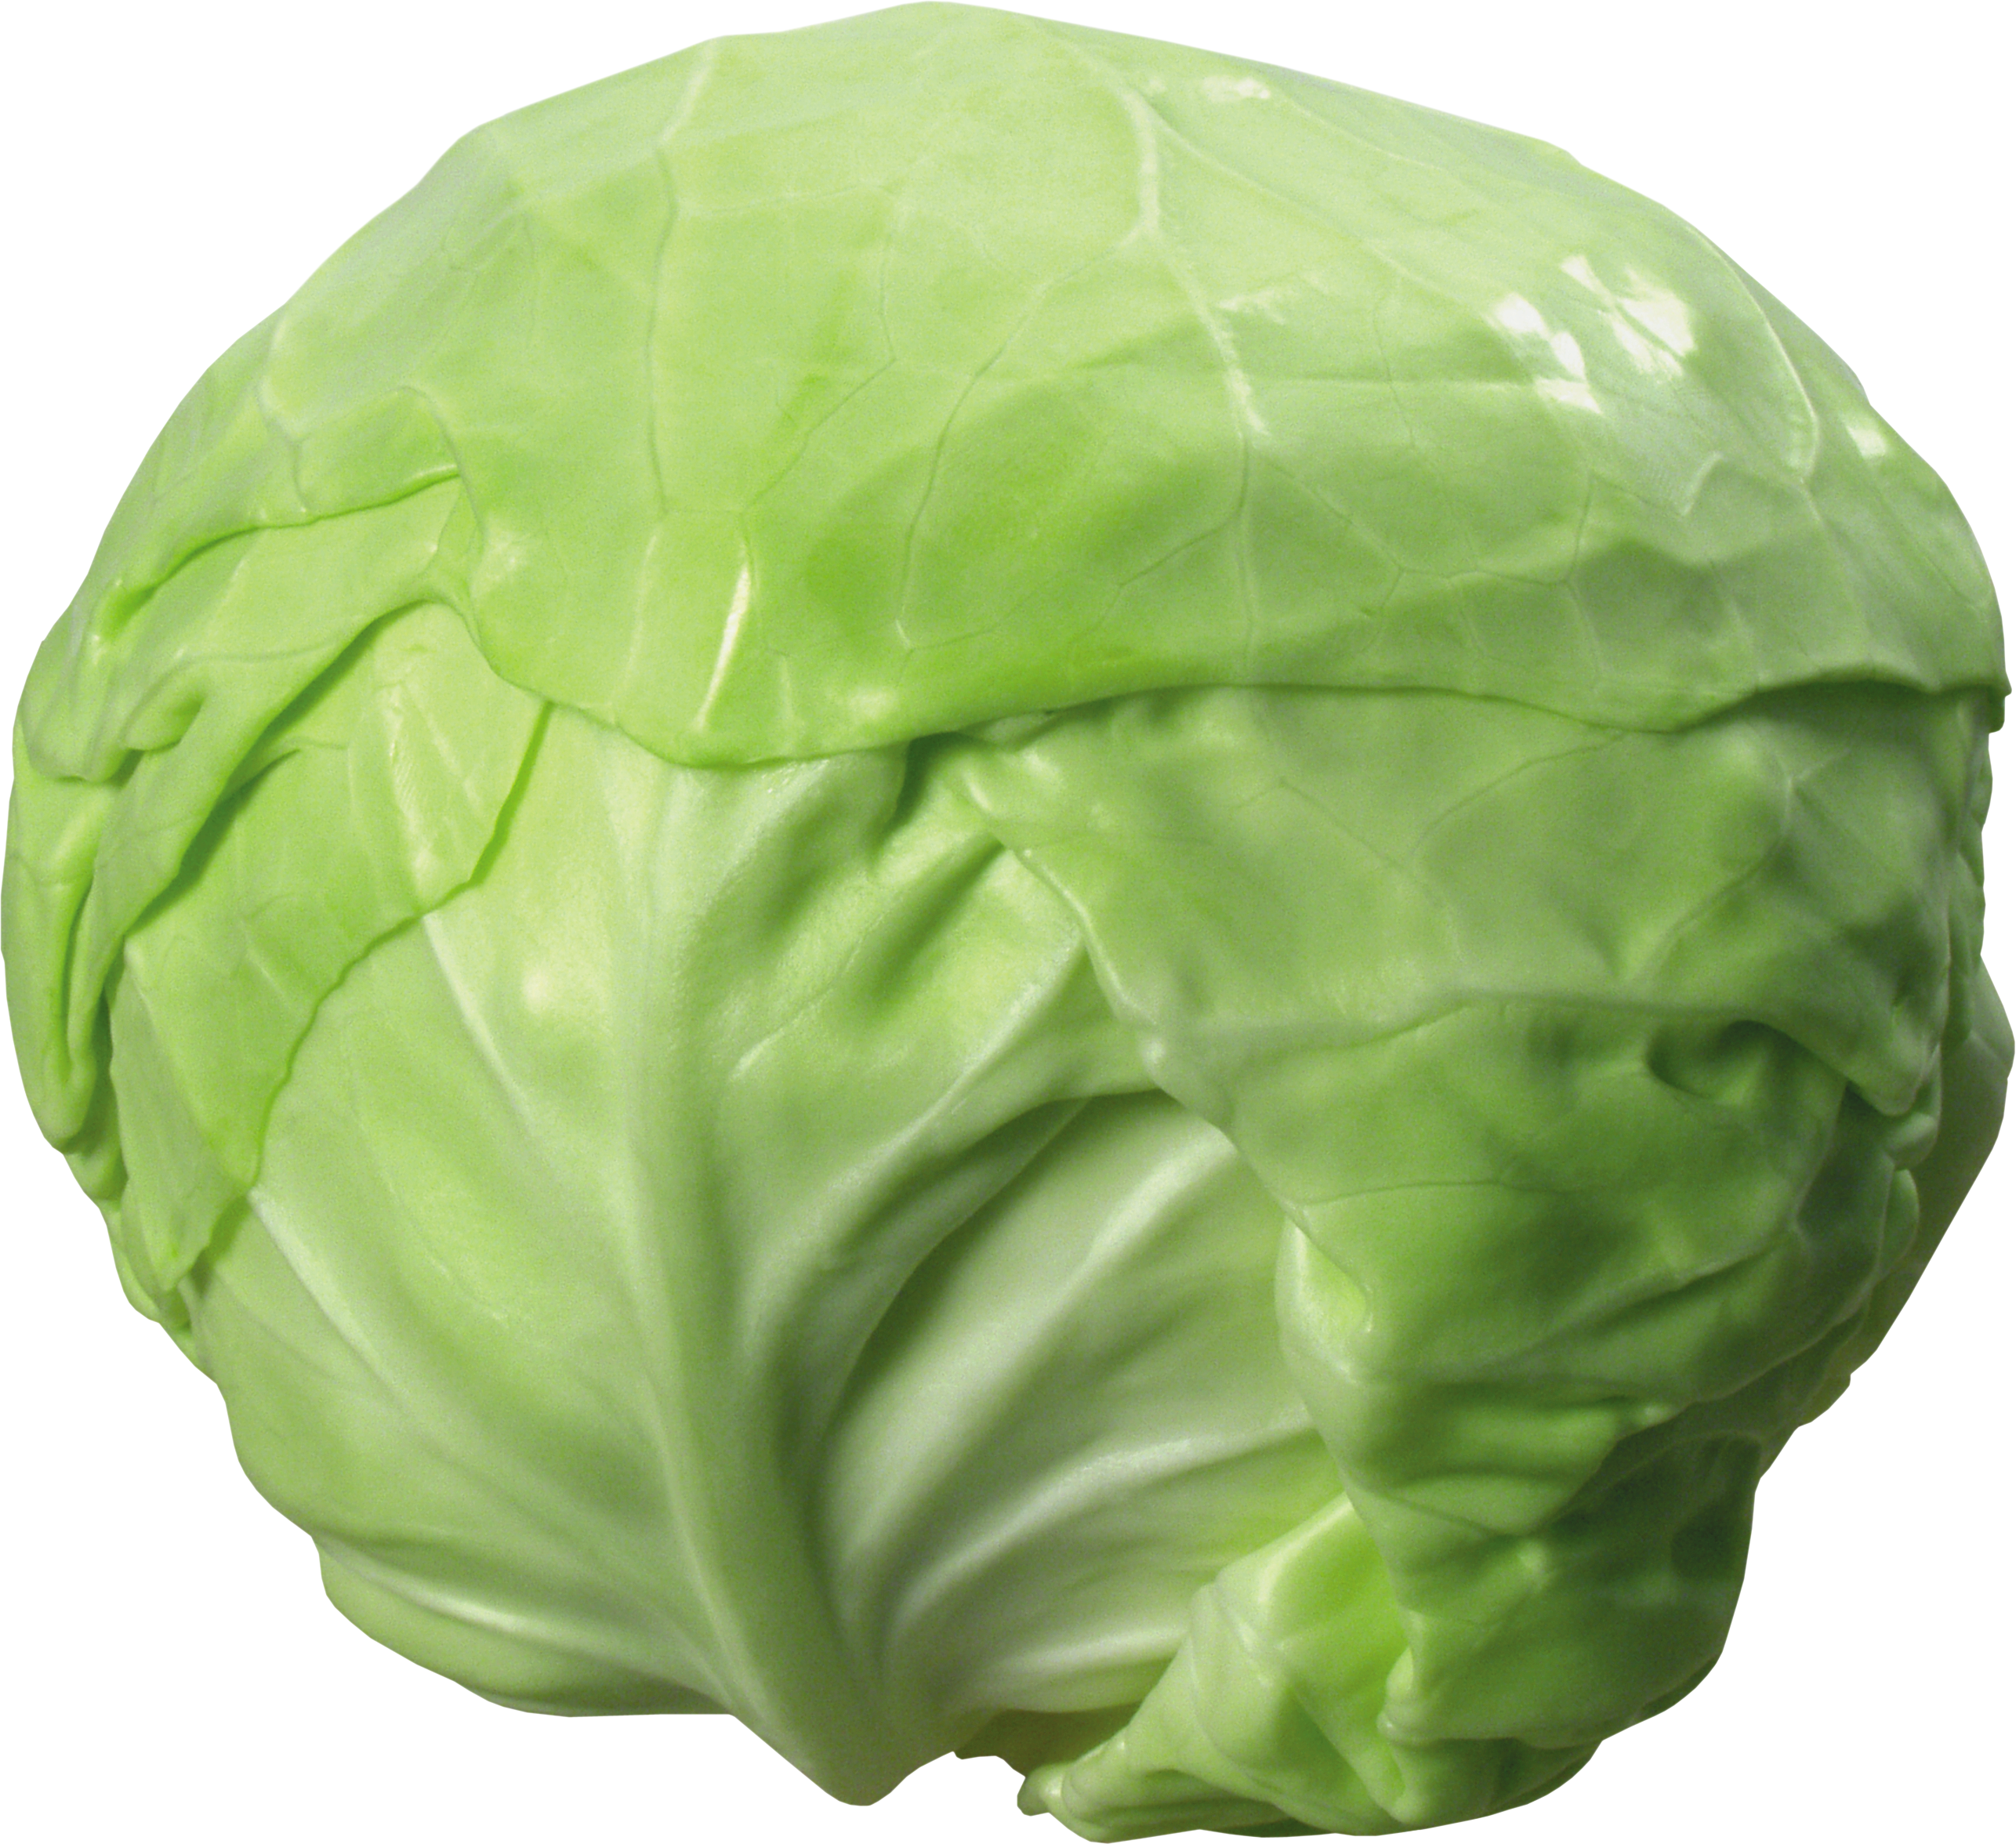 Cabbage PNG image